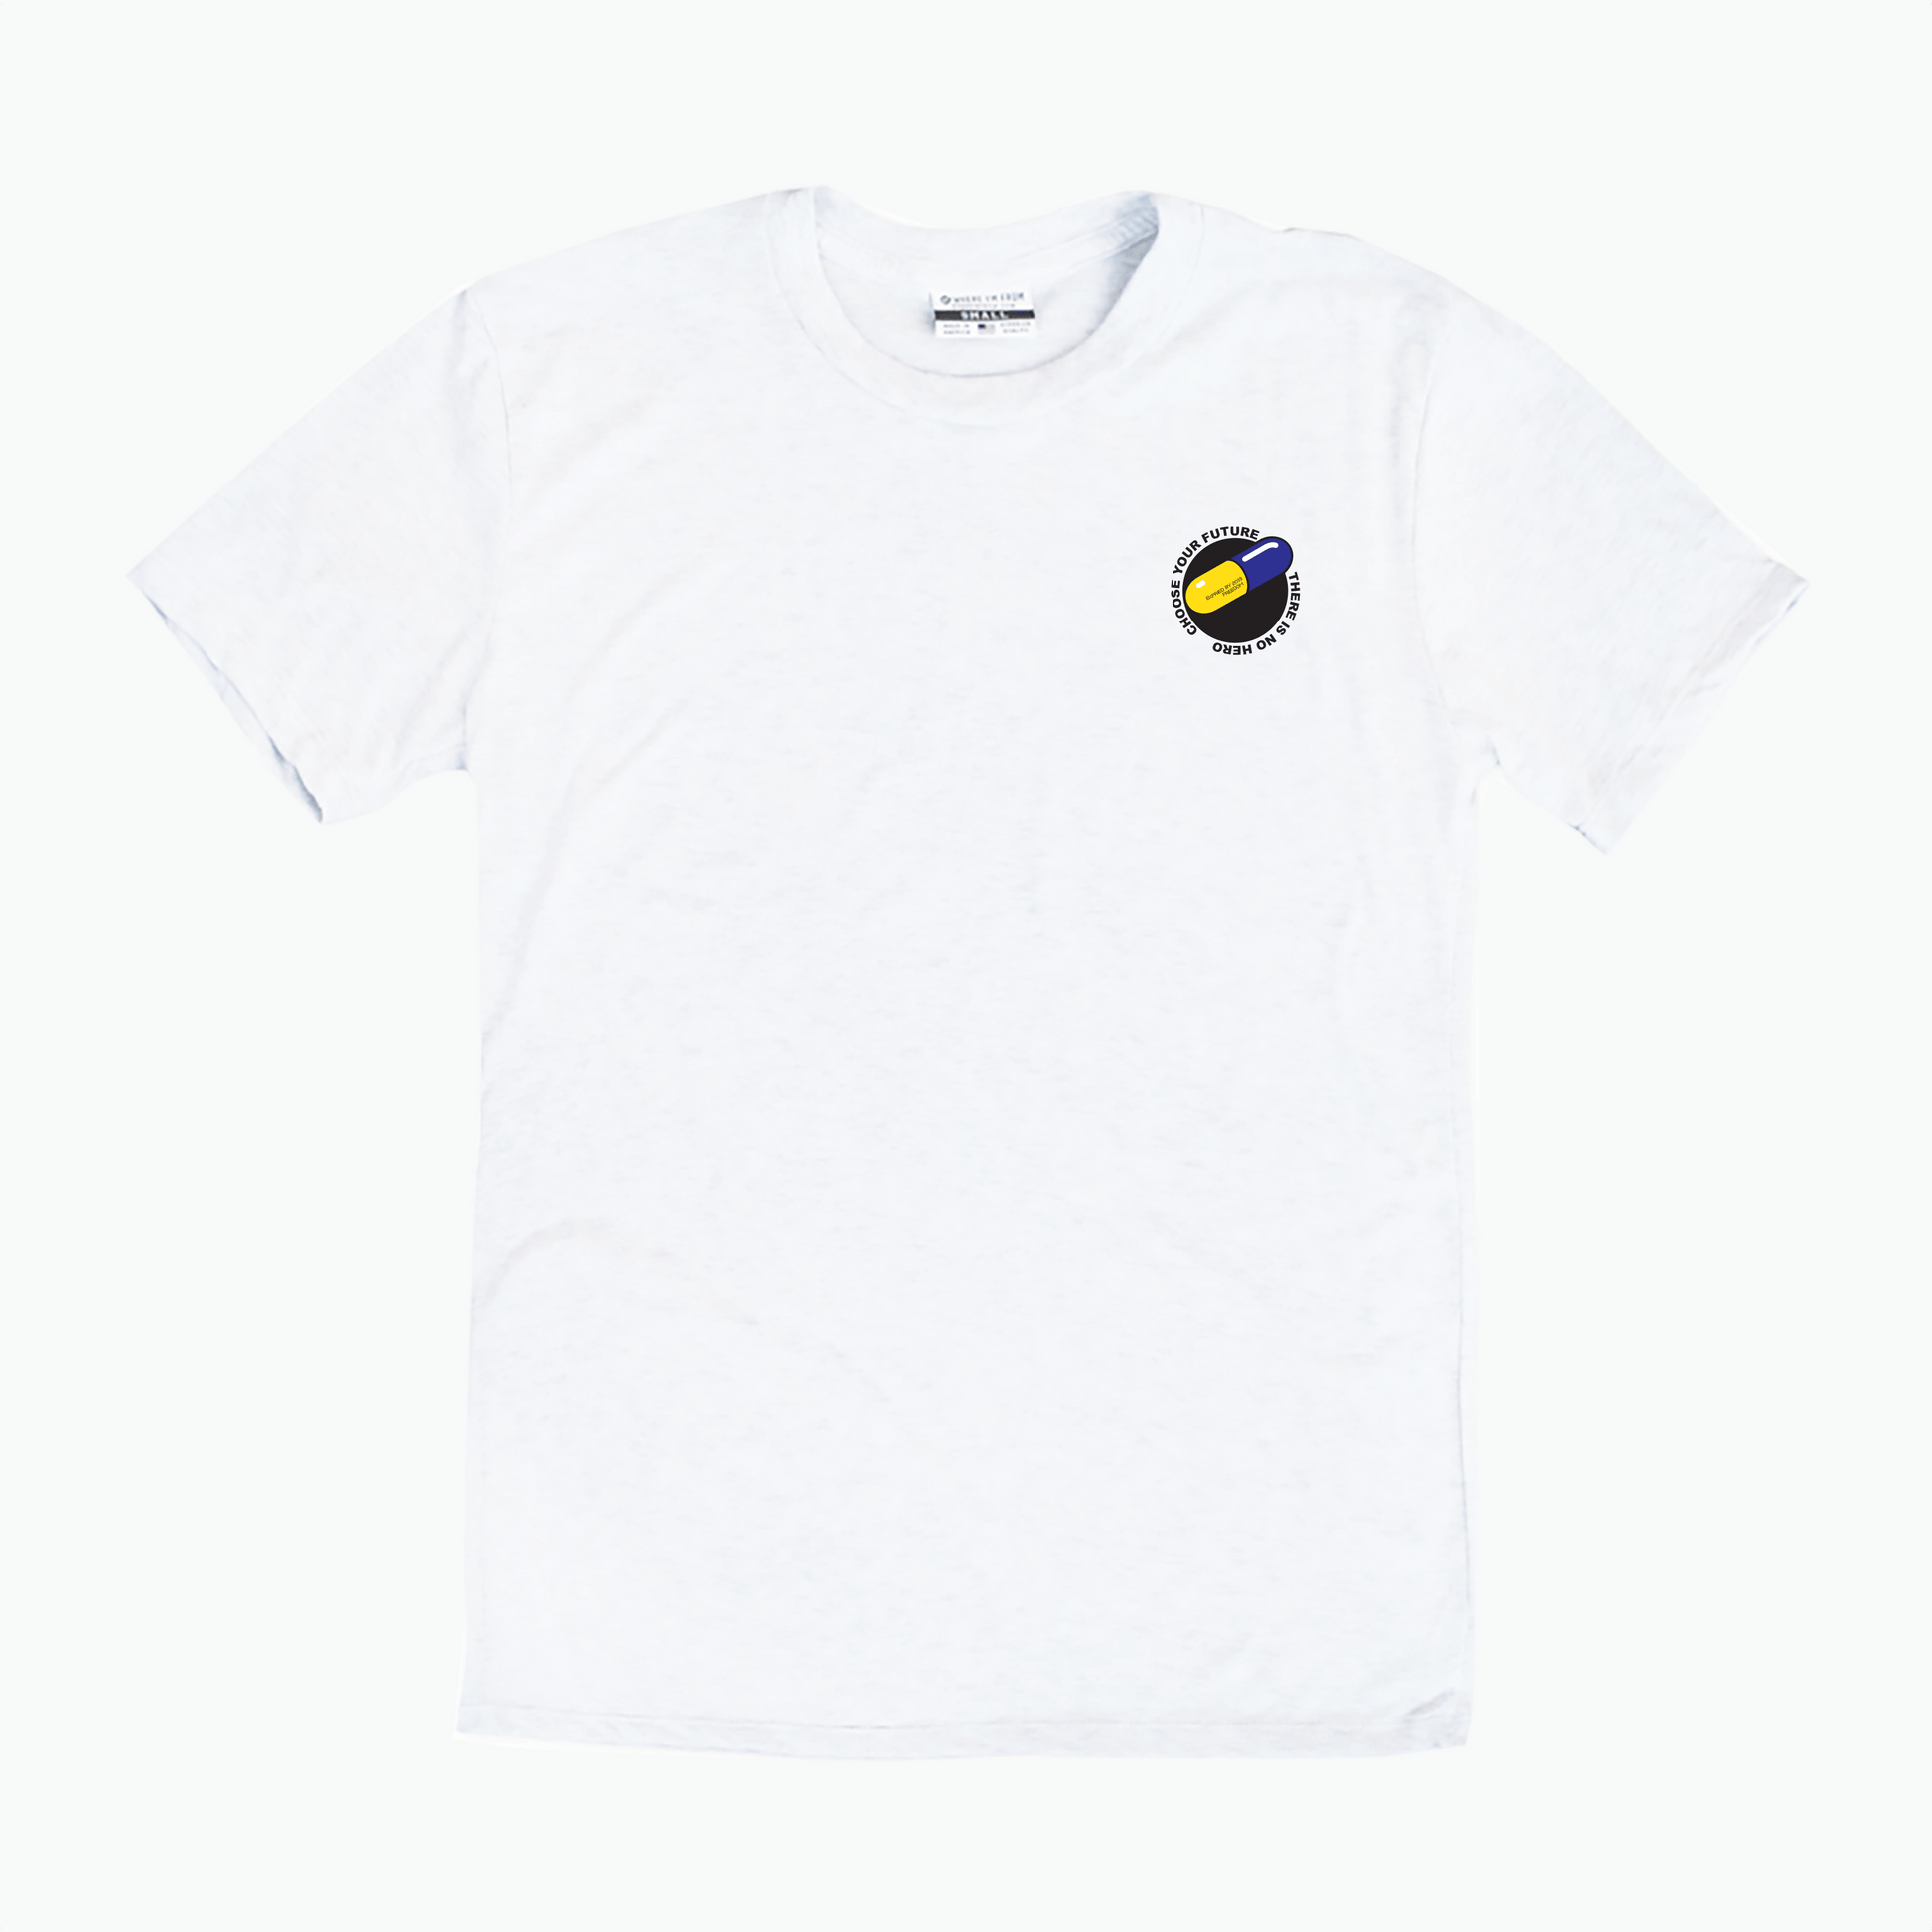 No Hero But Us T-Shirt (White) - A Yellow Object